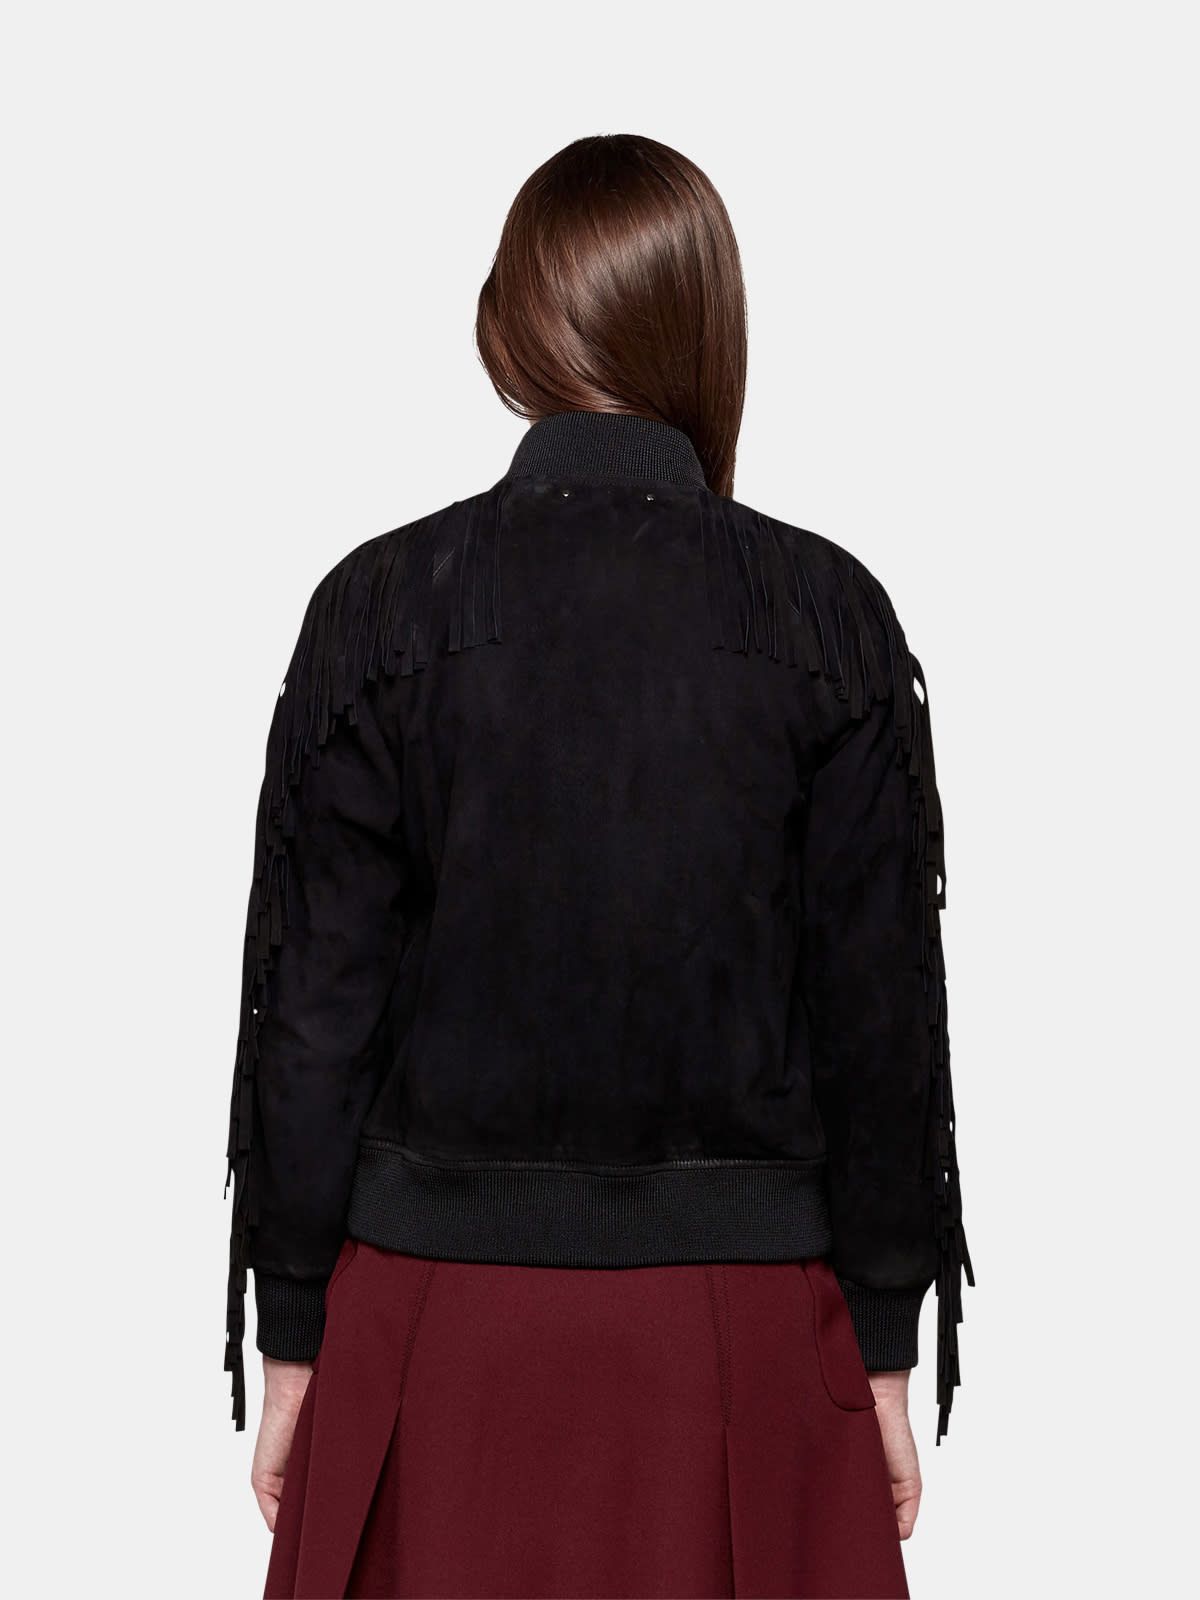 Akiko bomber jacket in suede leather with fringes on the sleeves